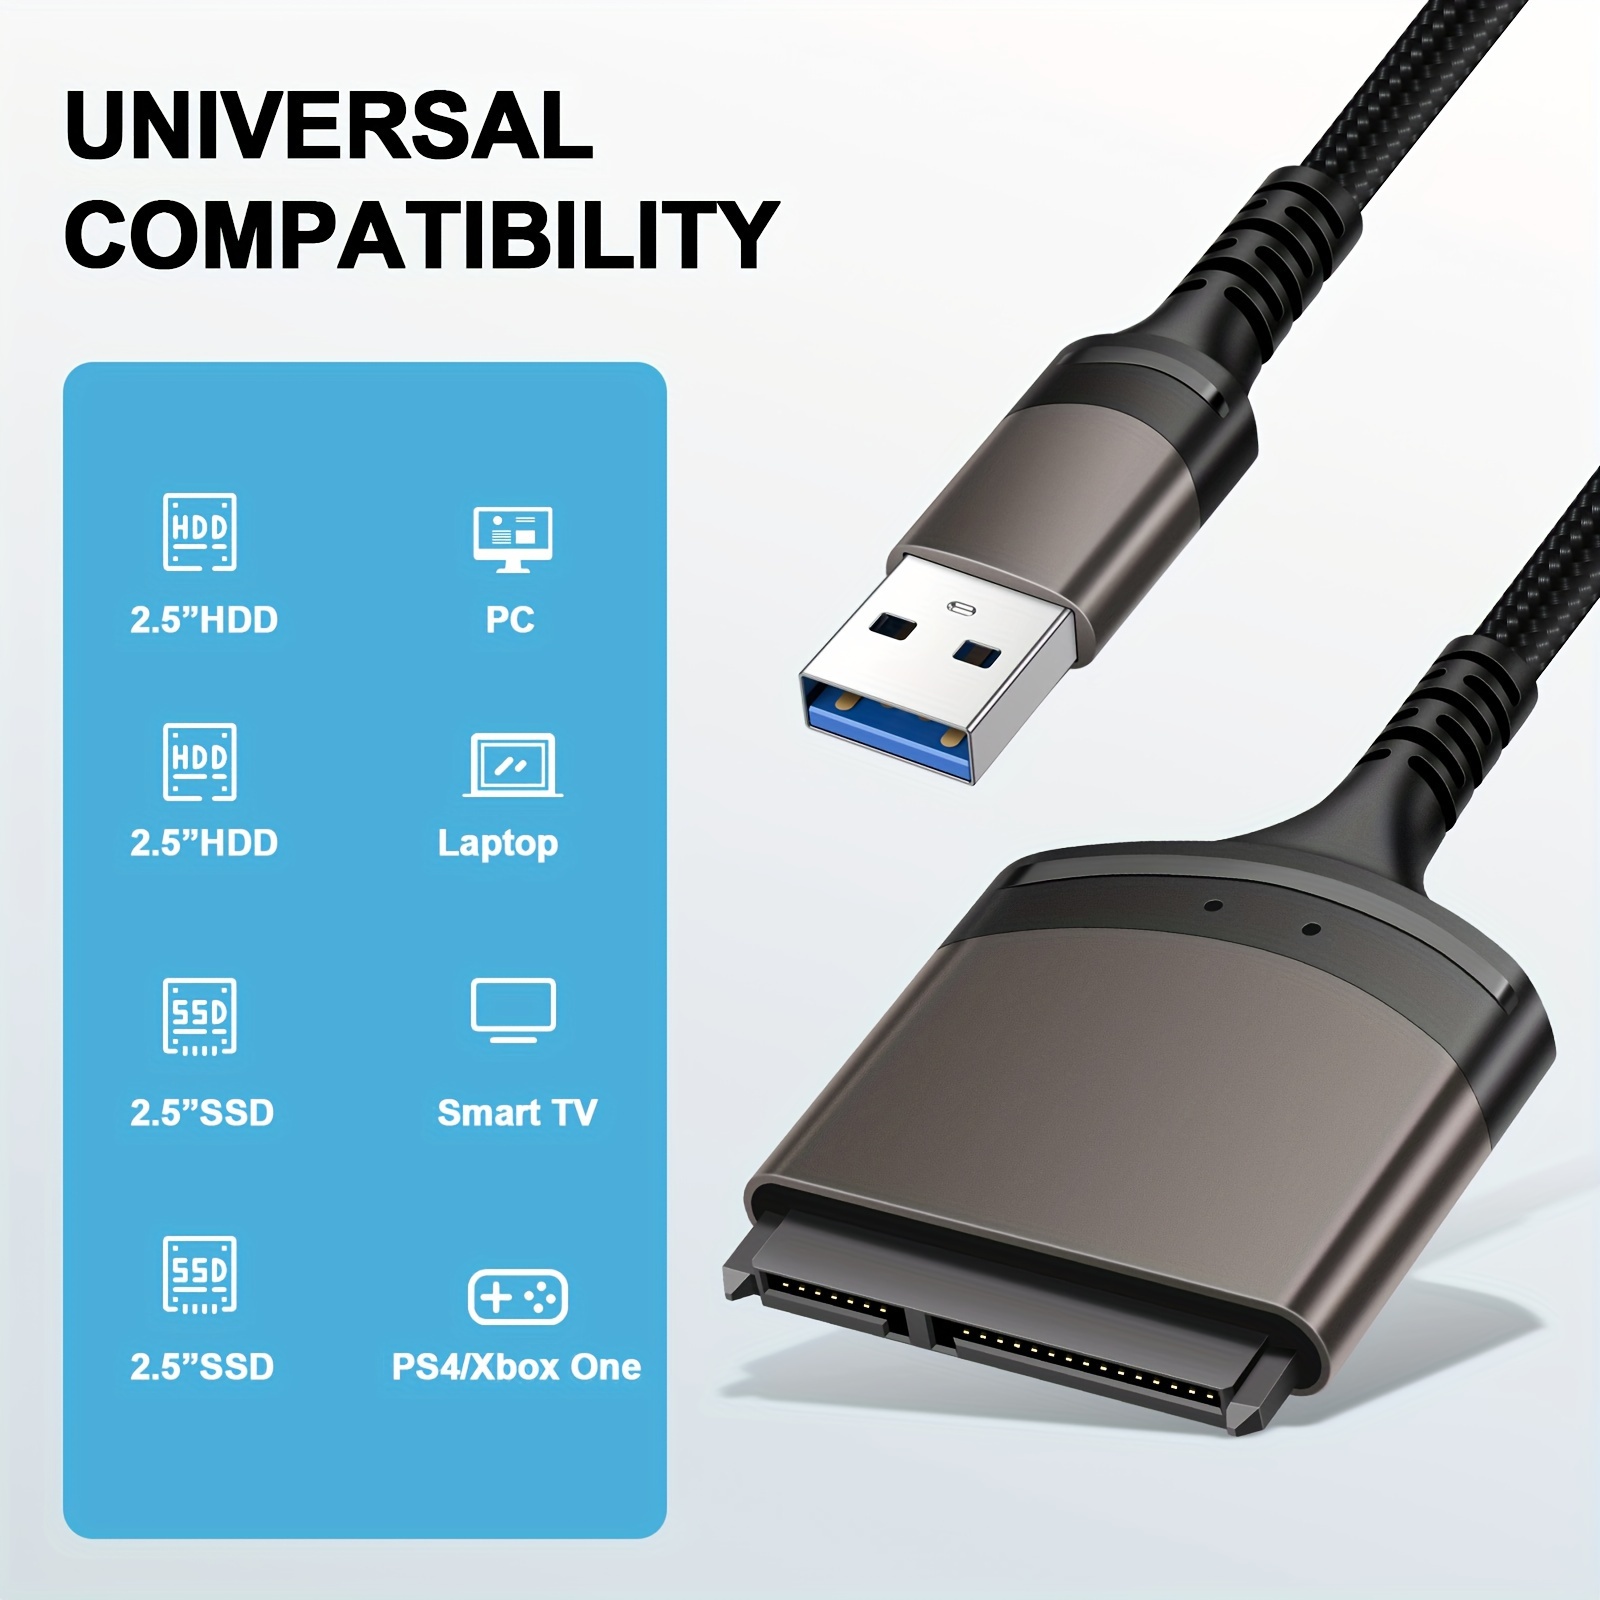 Premium USB 3.0 To SATA Drive Adapter Cable For All SSD SATA HDD Drive